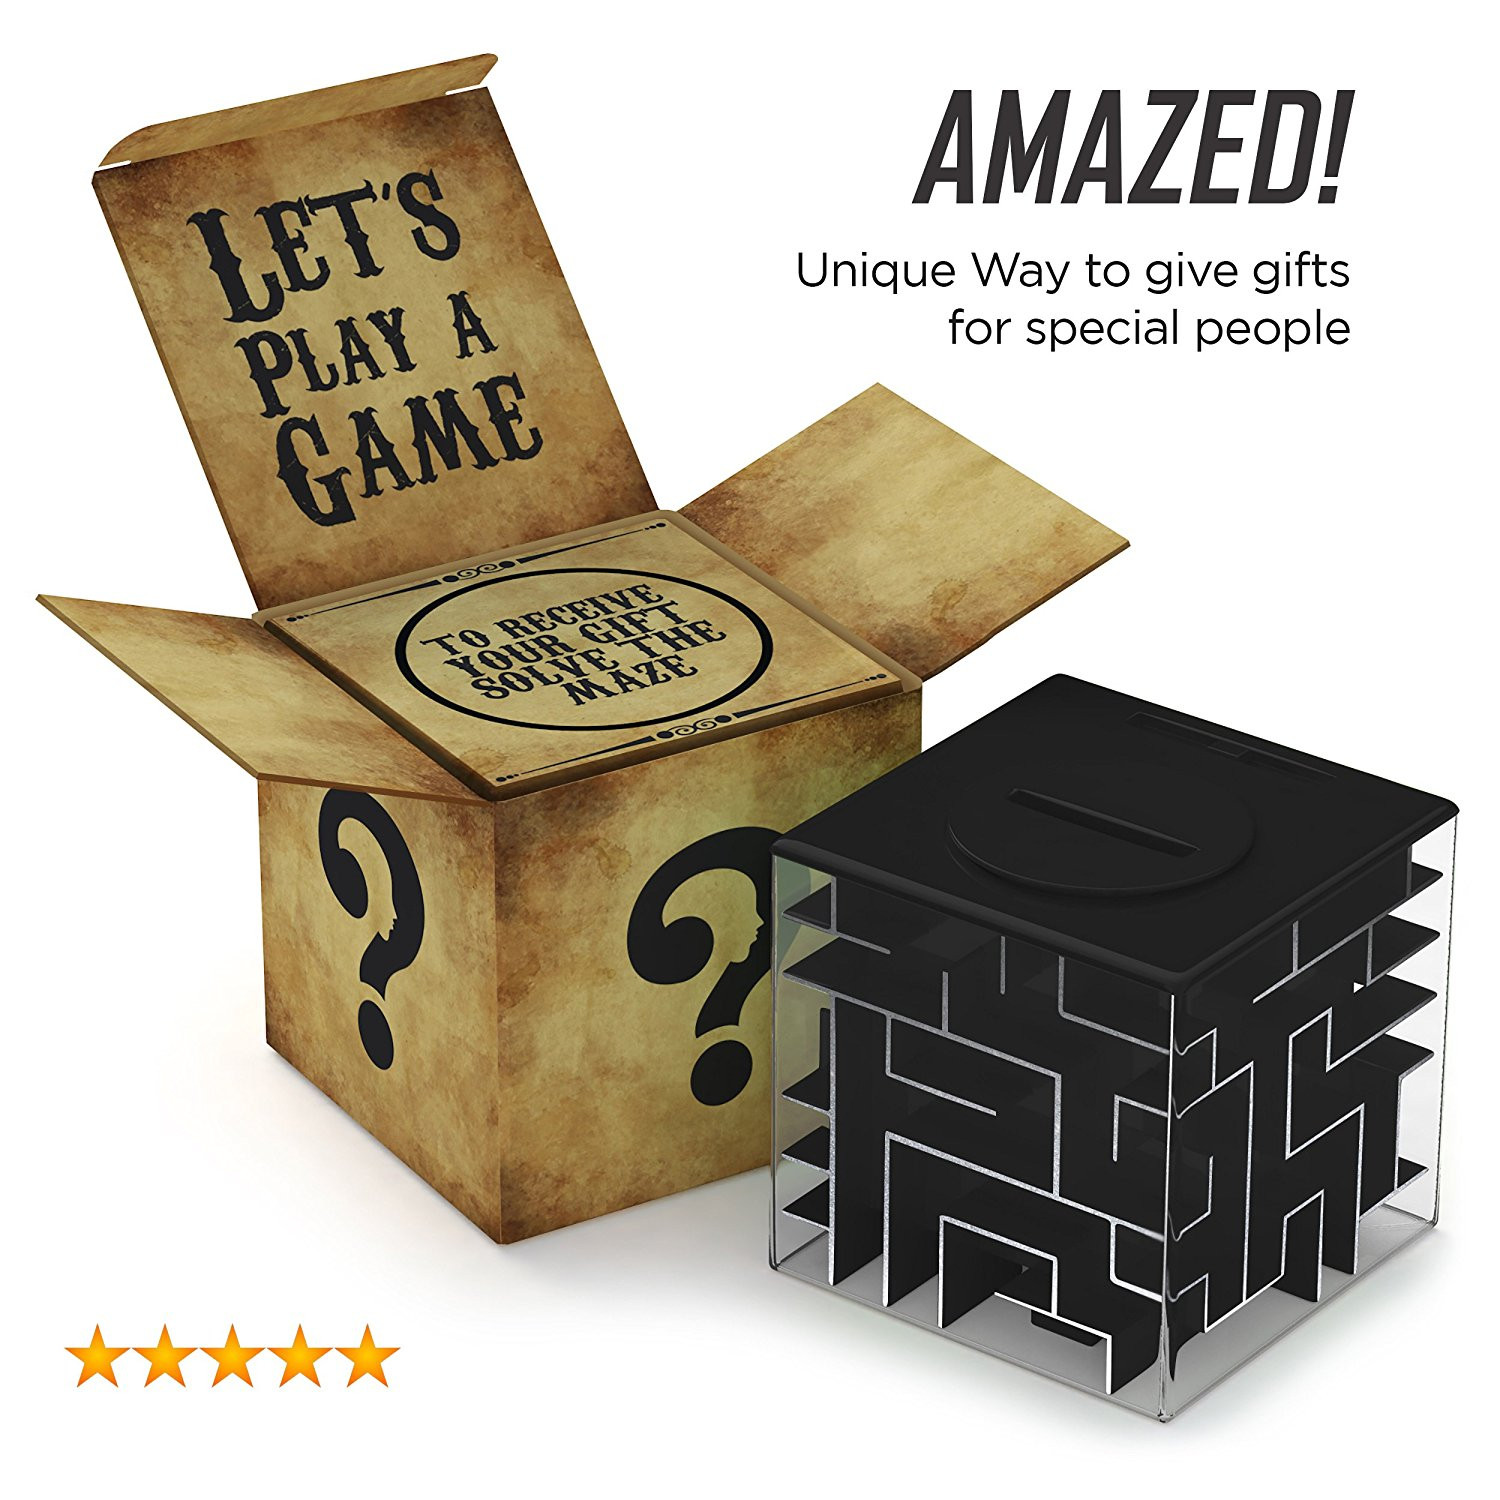 Cash Gifts To Children
 Money Maze Unique Way to Give Small Gifts Items